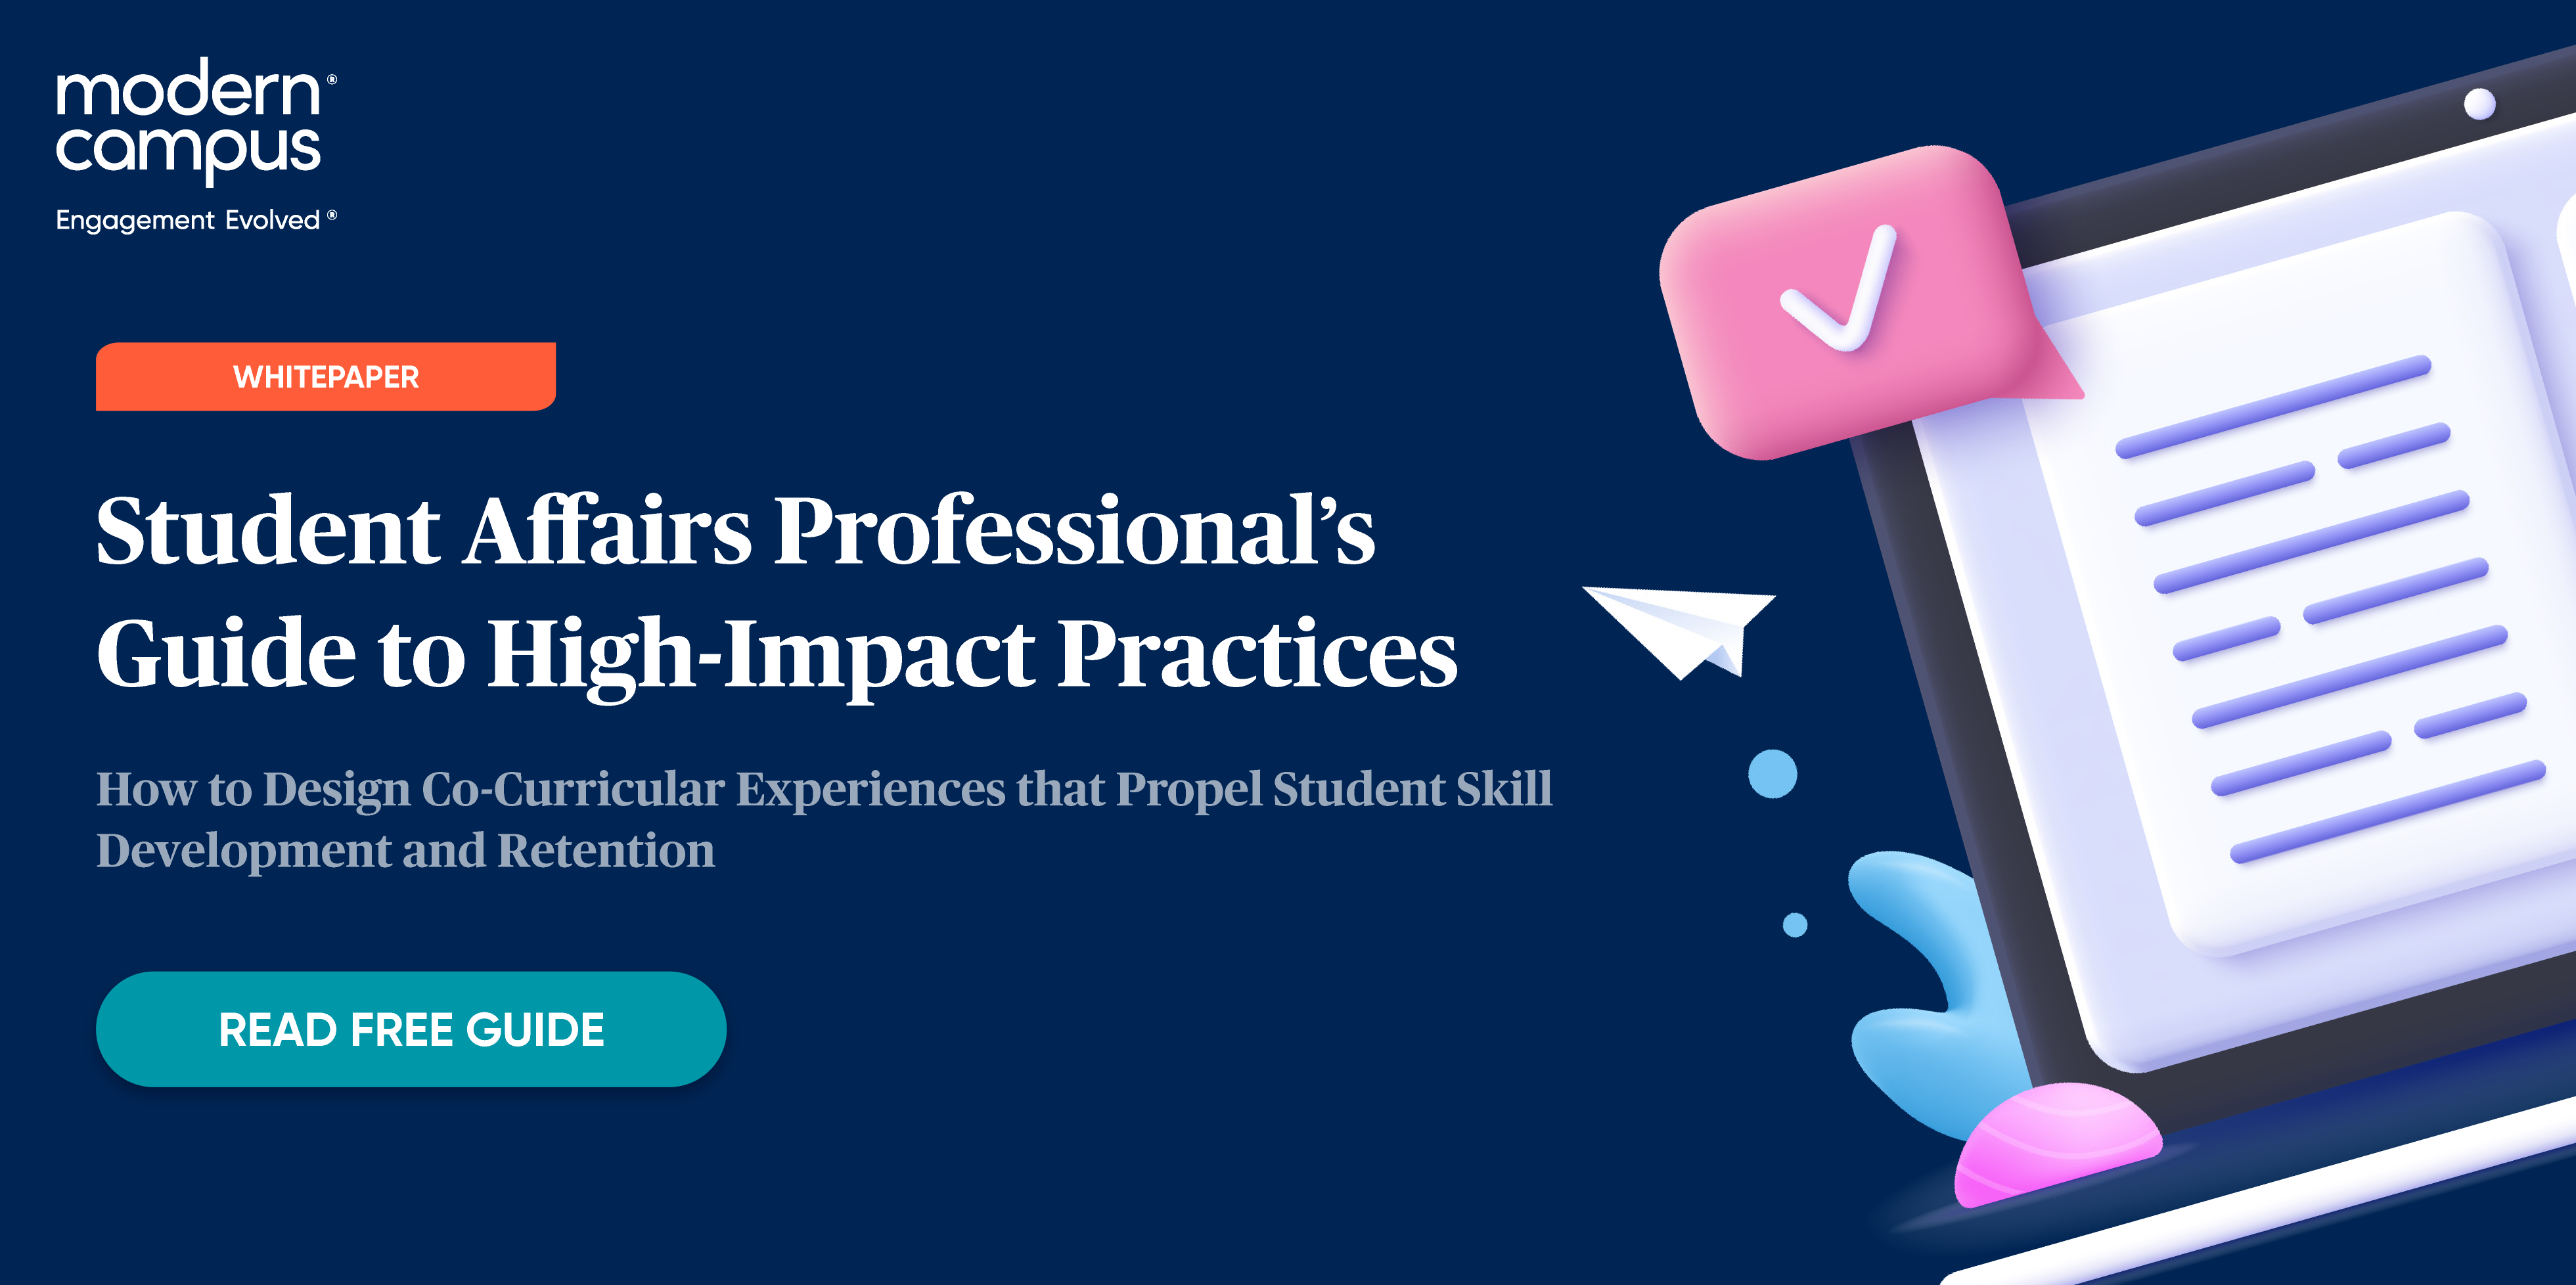 The Student Affairs Professional’s Guide to High-Impact Practices How to Design Co-Curricular Experiences that Propel Student Skill Development and Retention